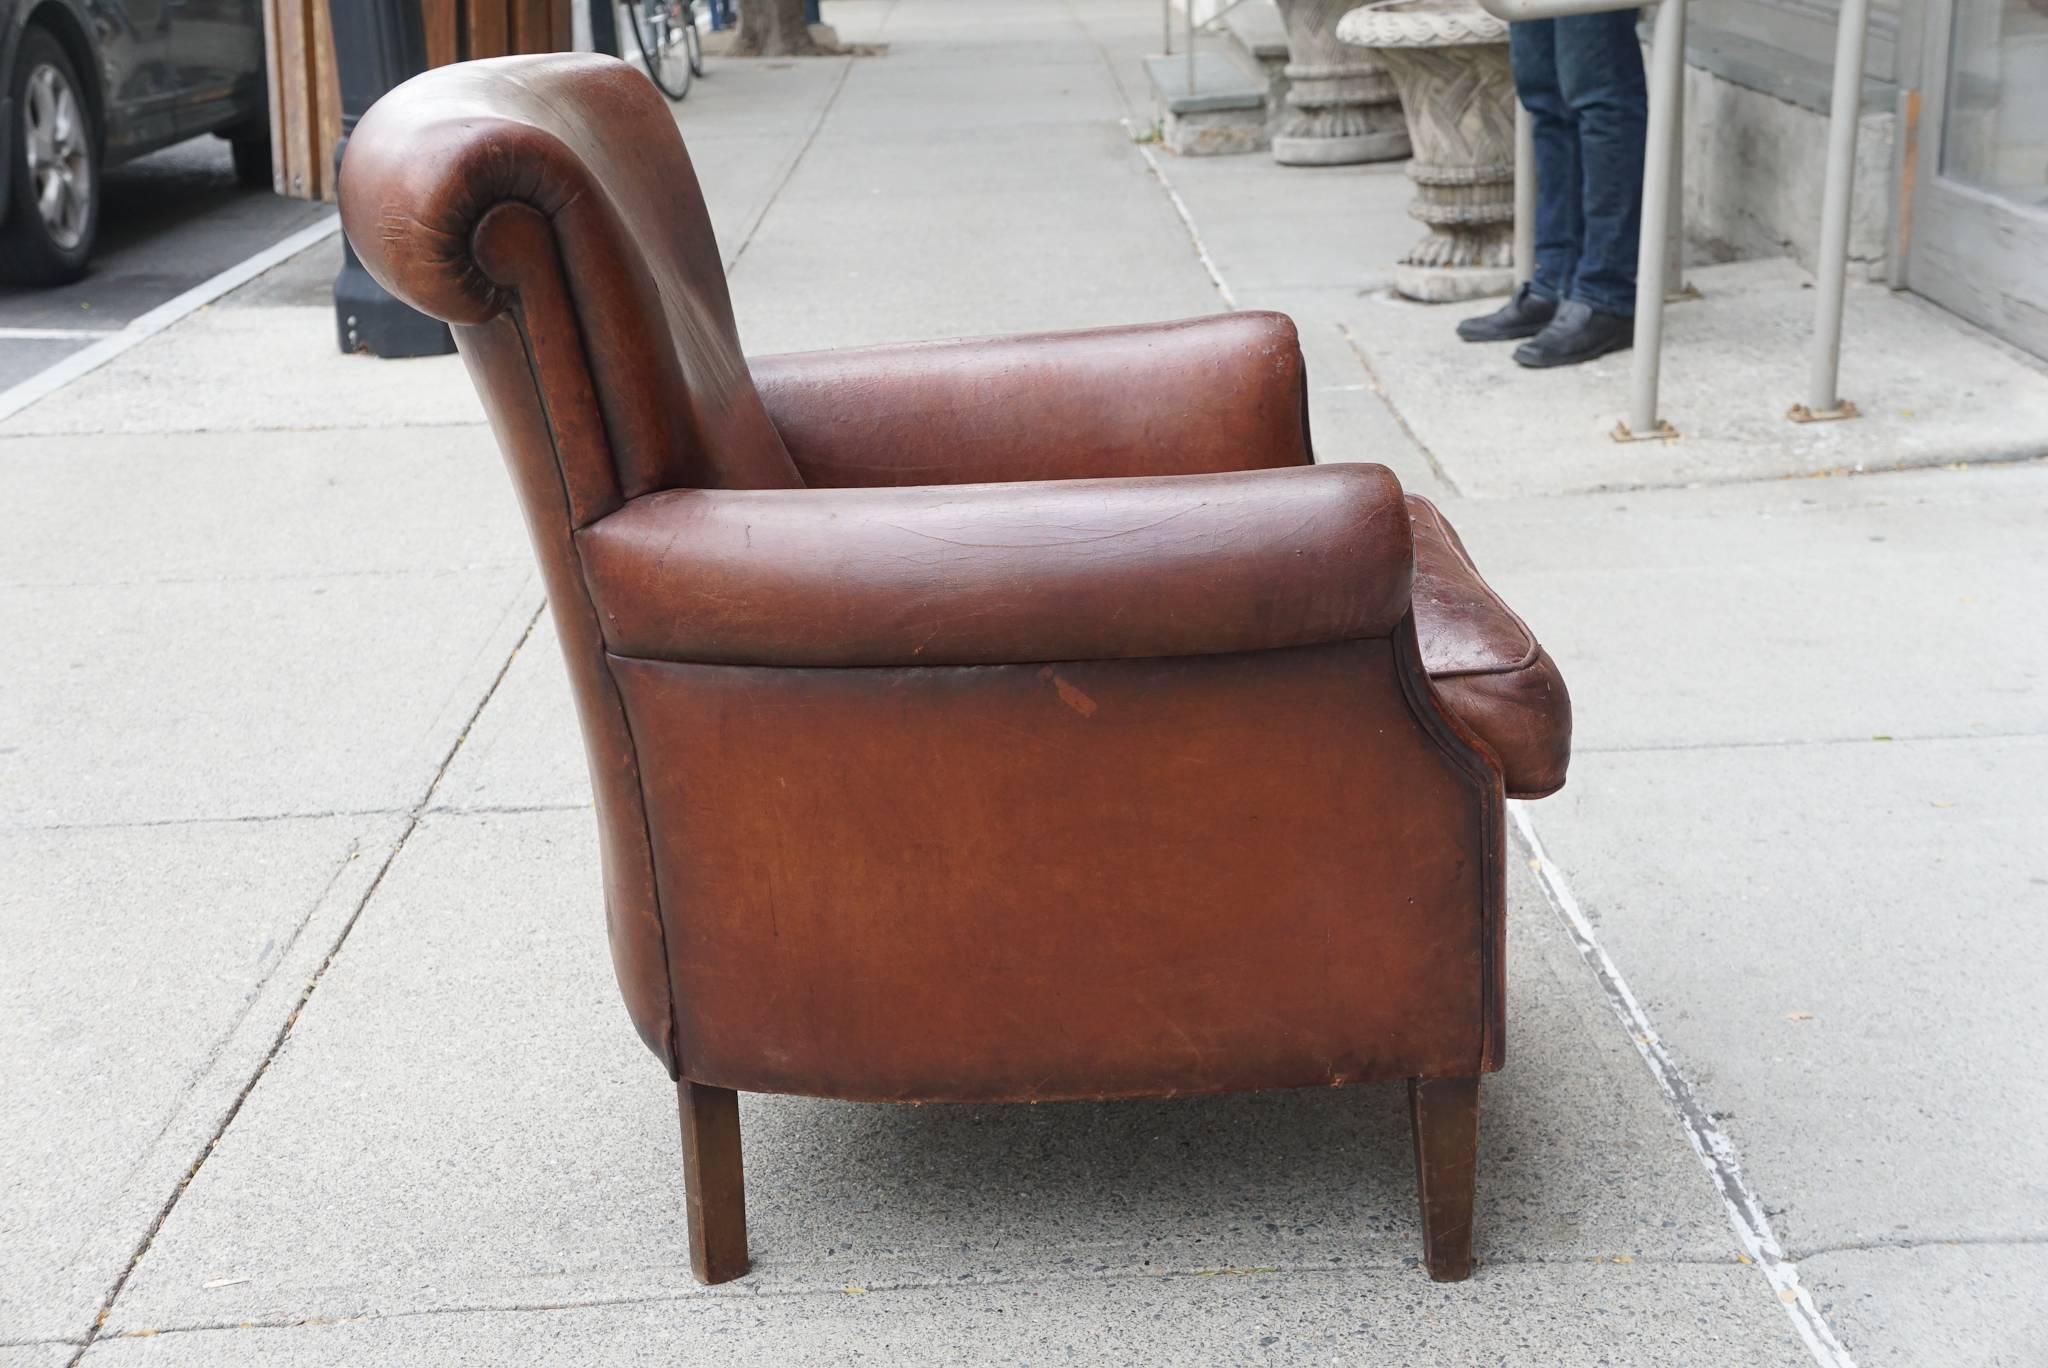 Hand-Crafted American Period Art Deco Leather Club Chair